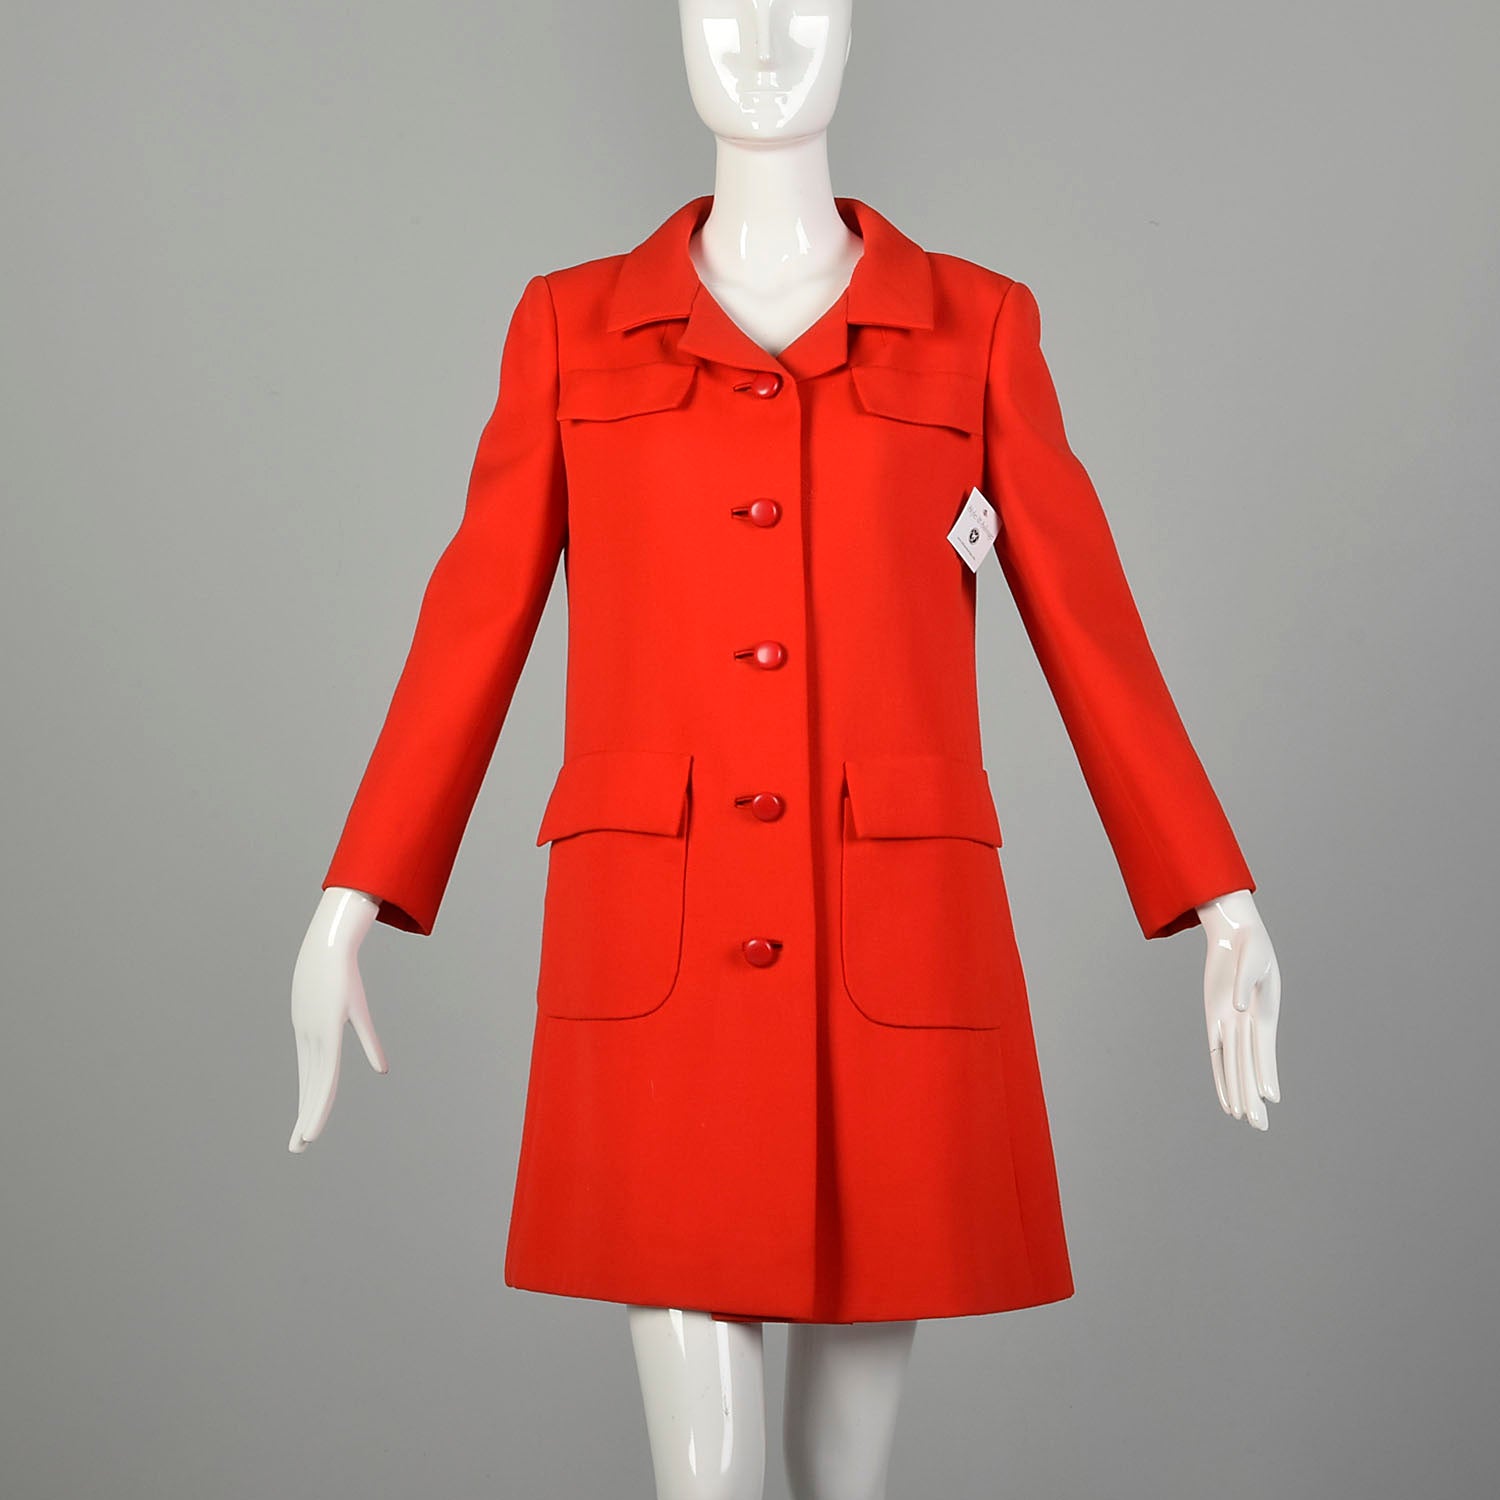 Small 1960s Mod Winter Coat Bold Pink Lining Bright Red Outerwear